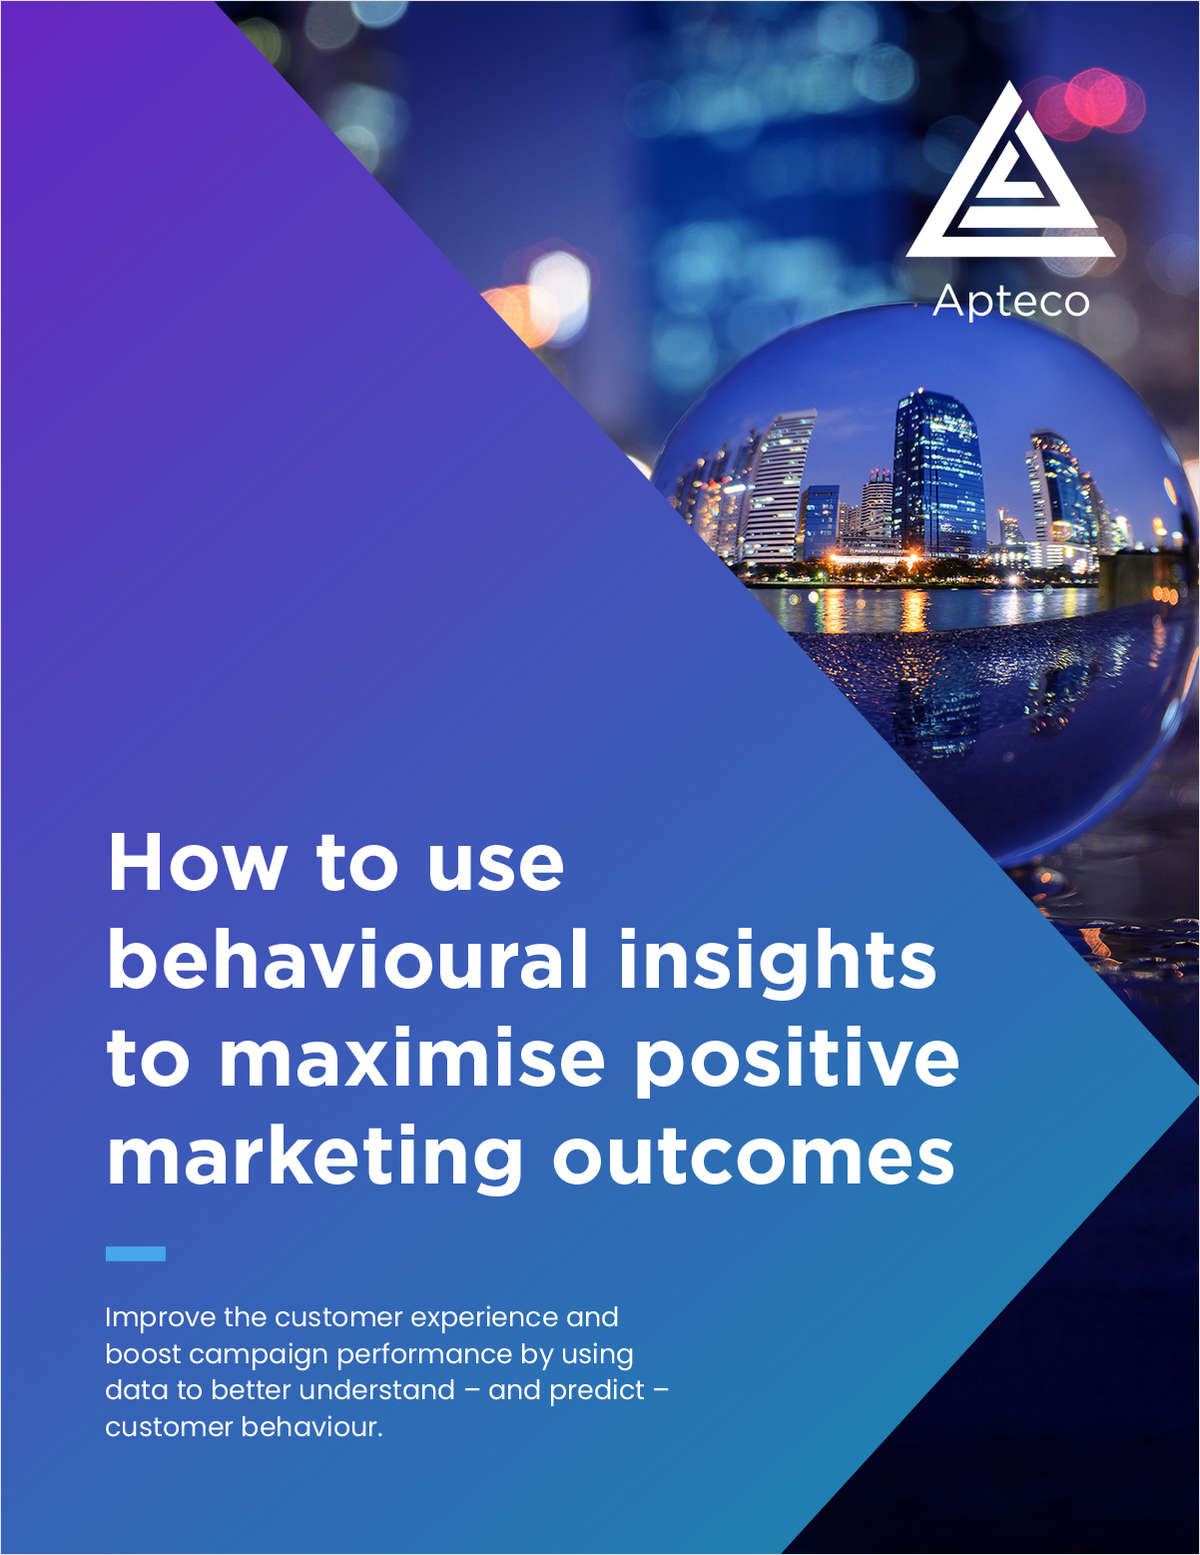 How to use behavioural insights to maximise positive marketing outcomes